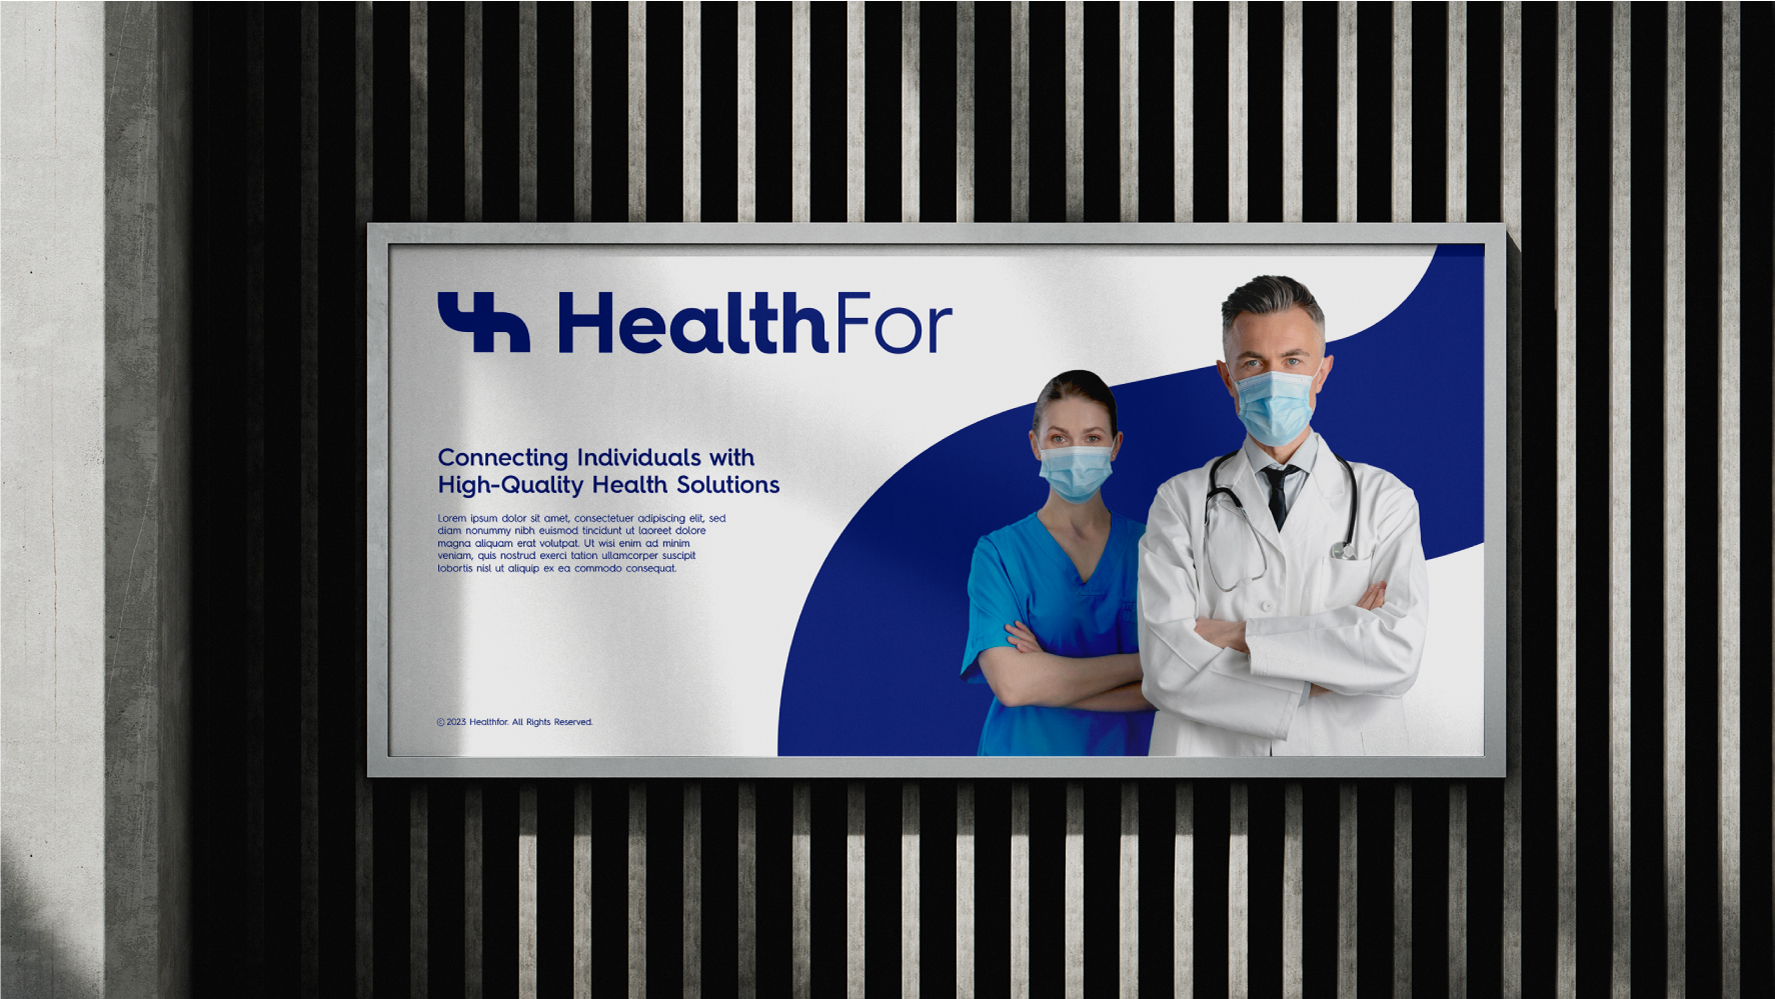 Over&Over Create Brand Design for HealthFor’s Visionary Healthcare Solution